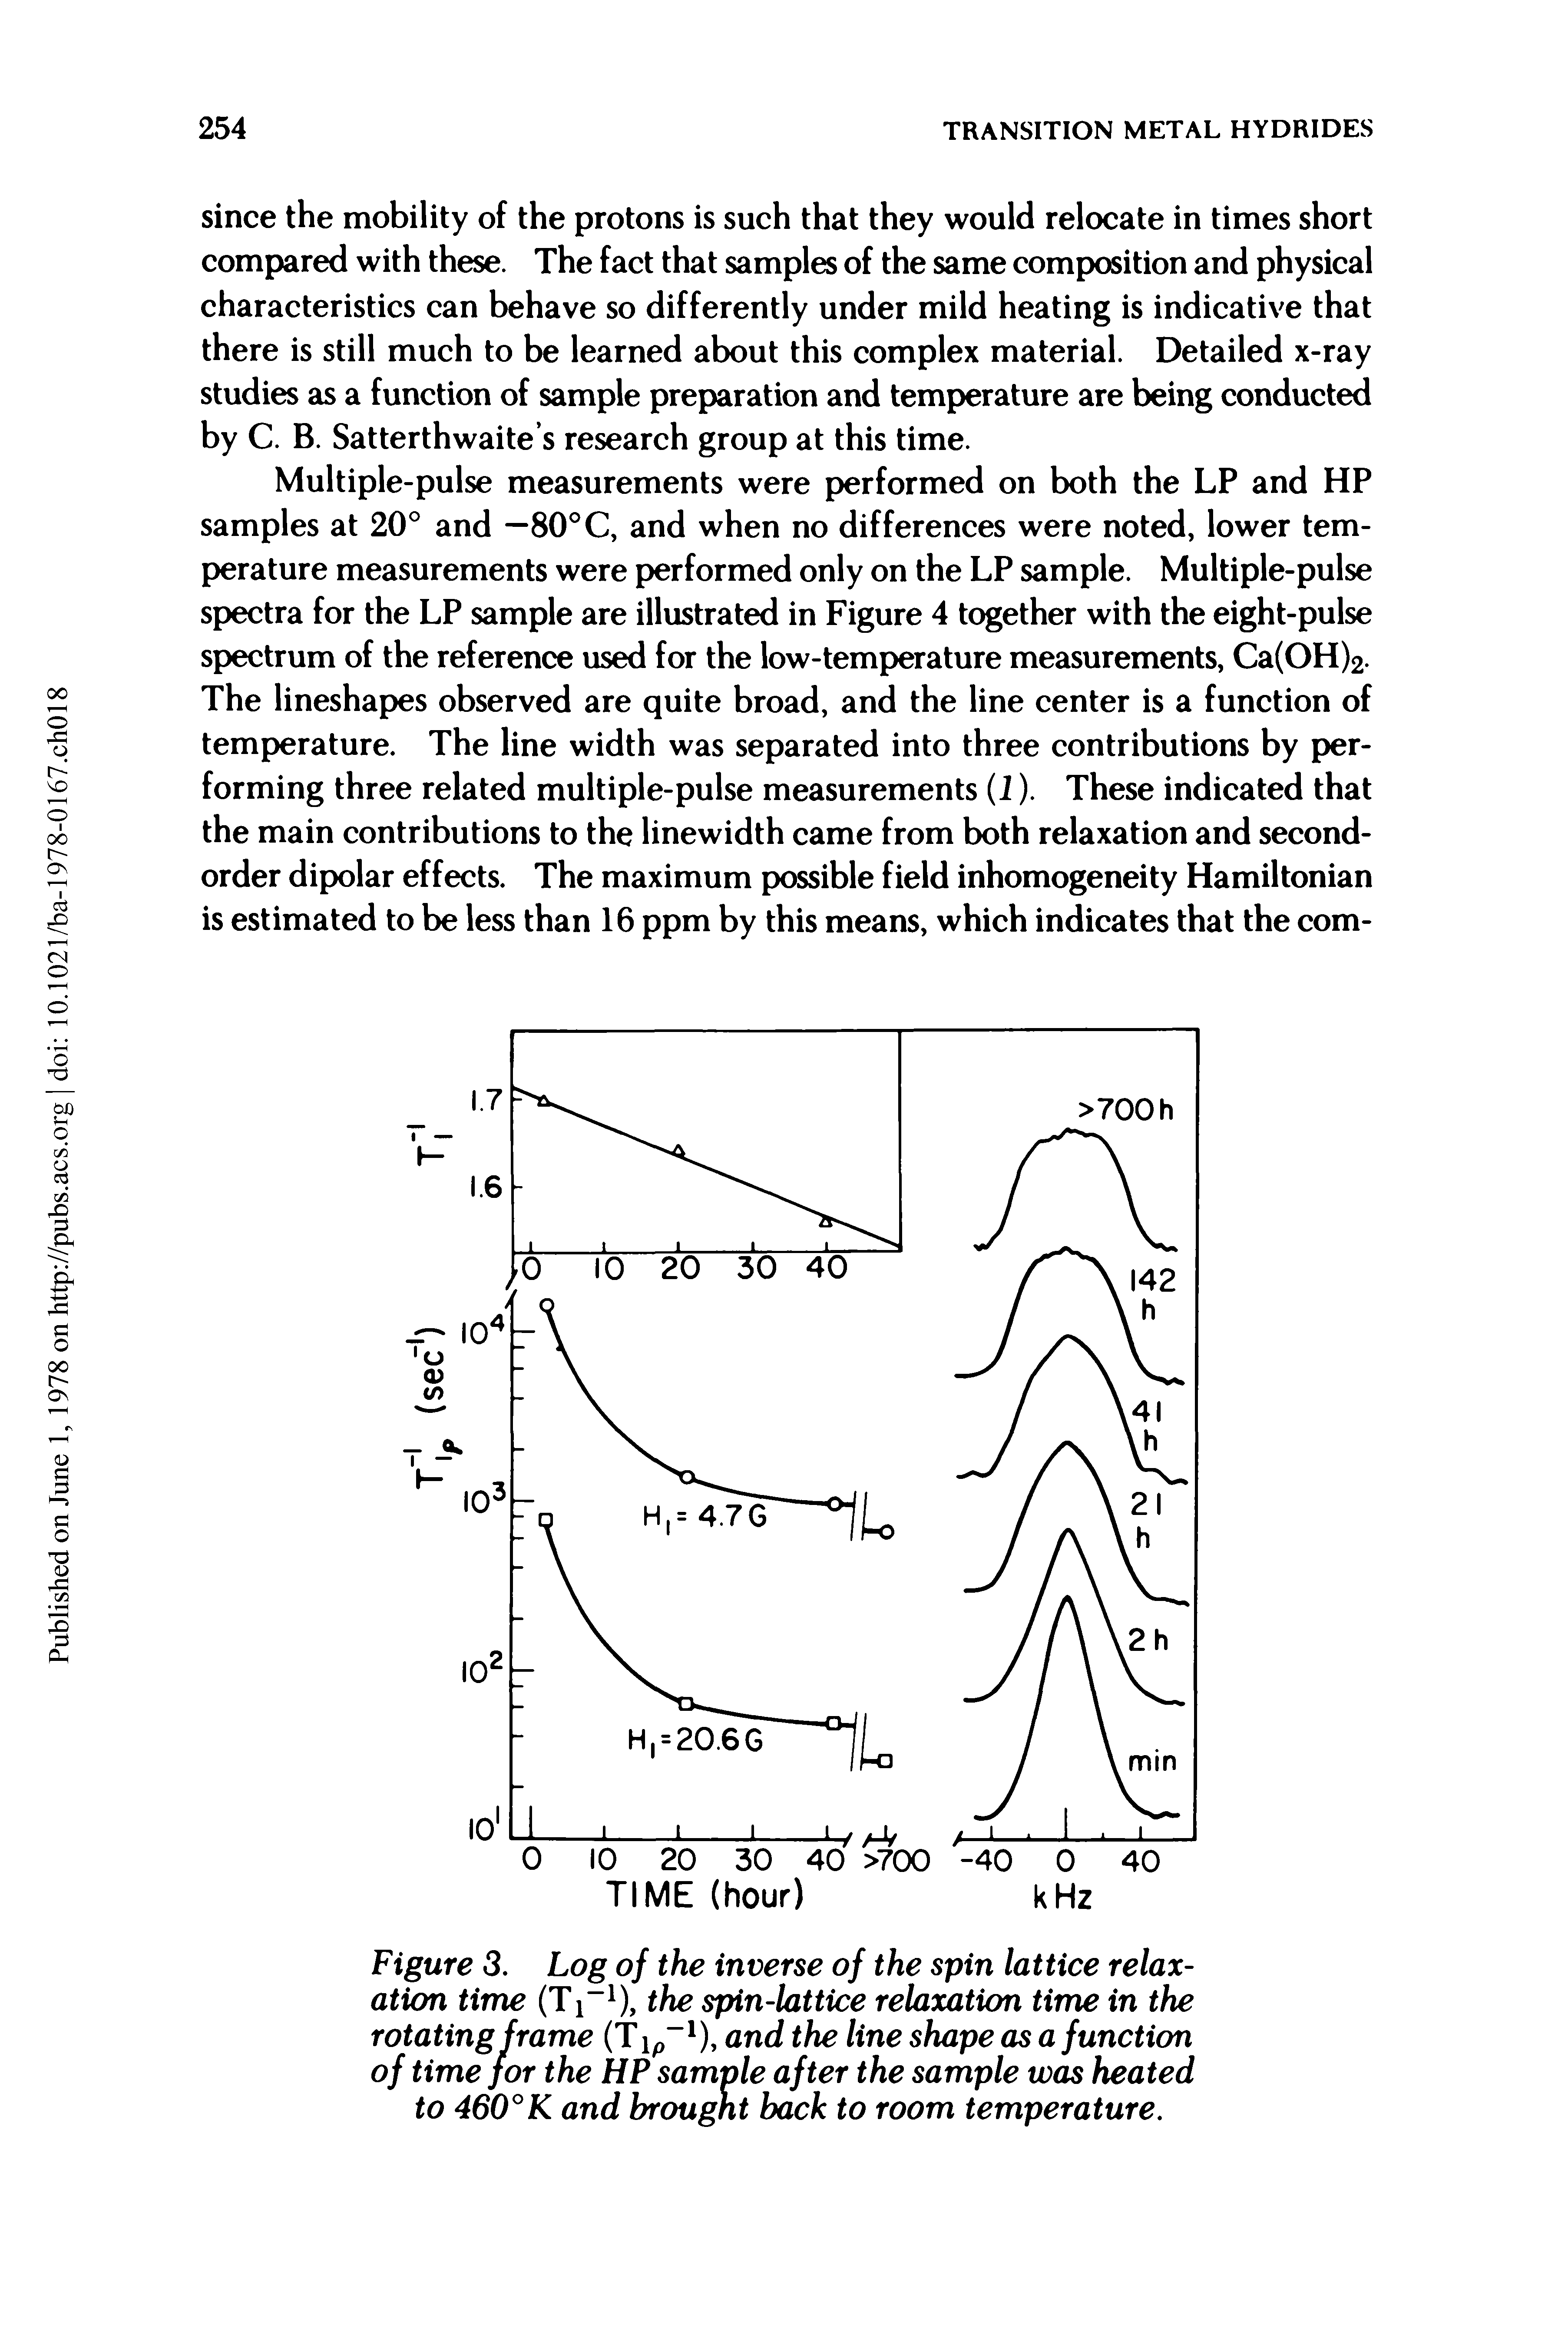 Figure 3. Log of the inverse of the spin lattice relaxation time (T 1), the spin-lattice relaxation time in the rotating frame (T lp 1), and the line shape as a function of time for the HP sample after the sample was heated to 460°K and brought back to room temperature.